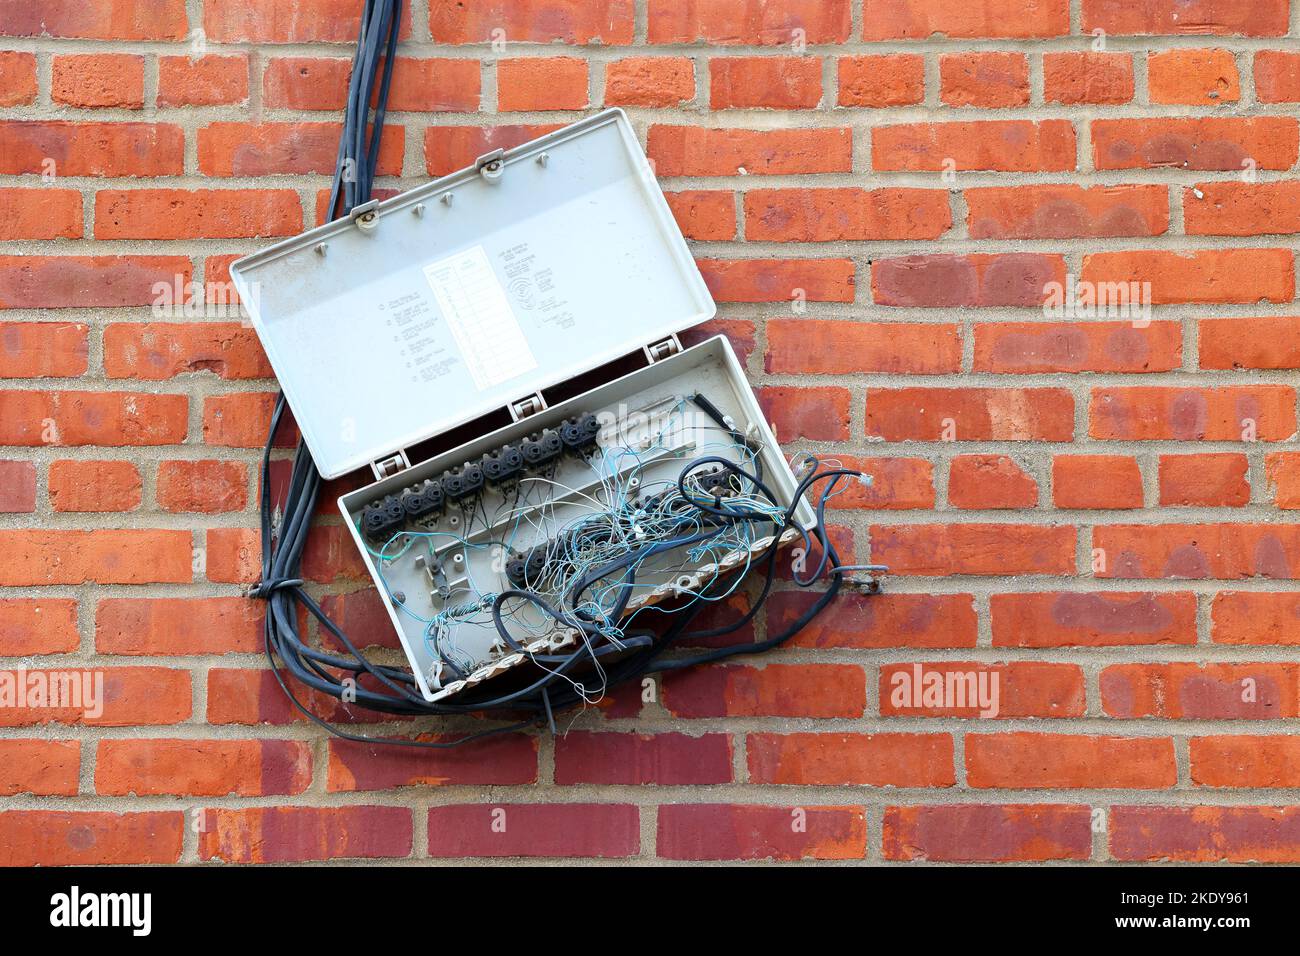 An outdoor telephone box with tangled wires and corrosion, haphazardly dangling off a brick wall. Stock Photo